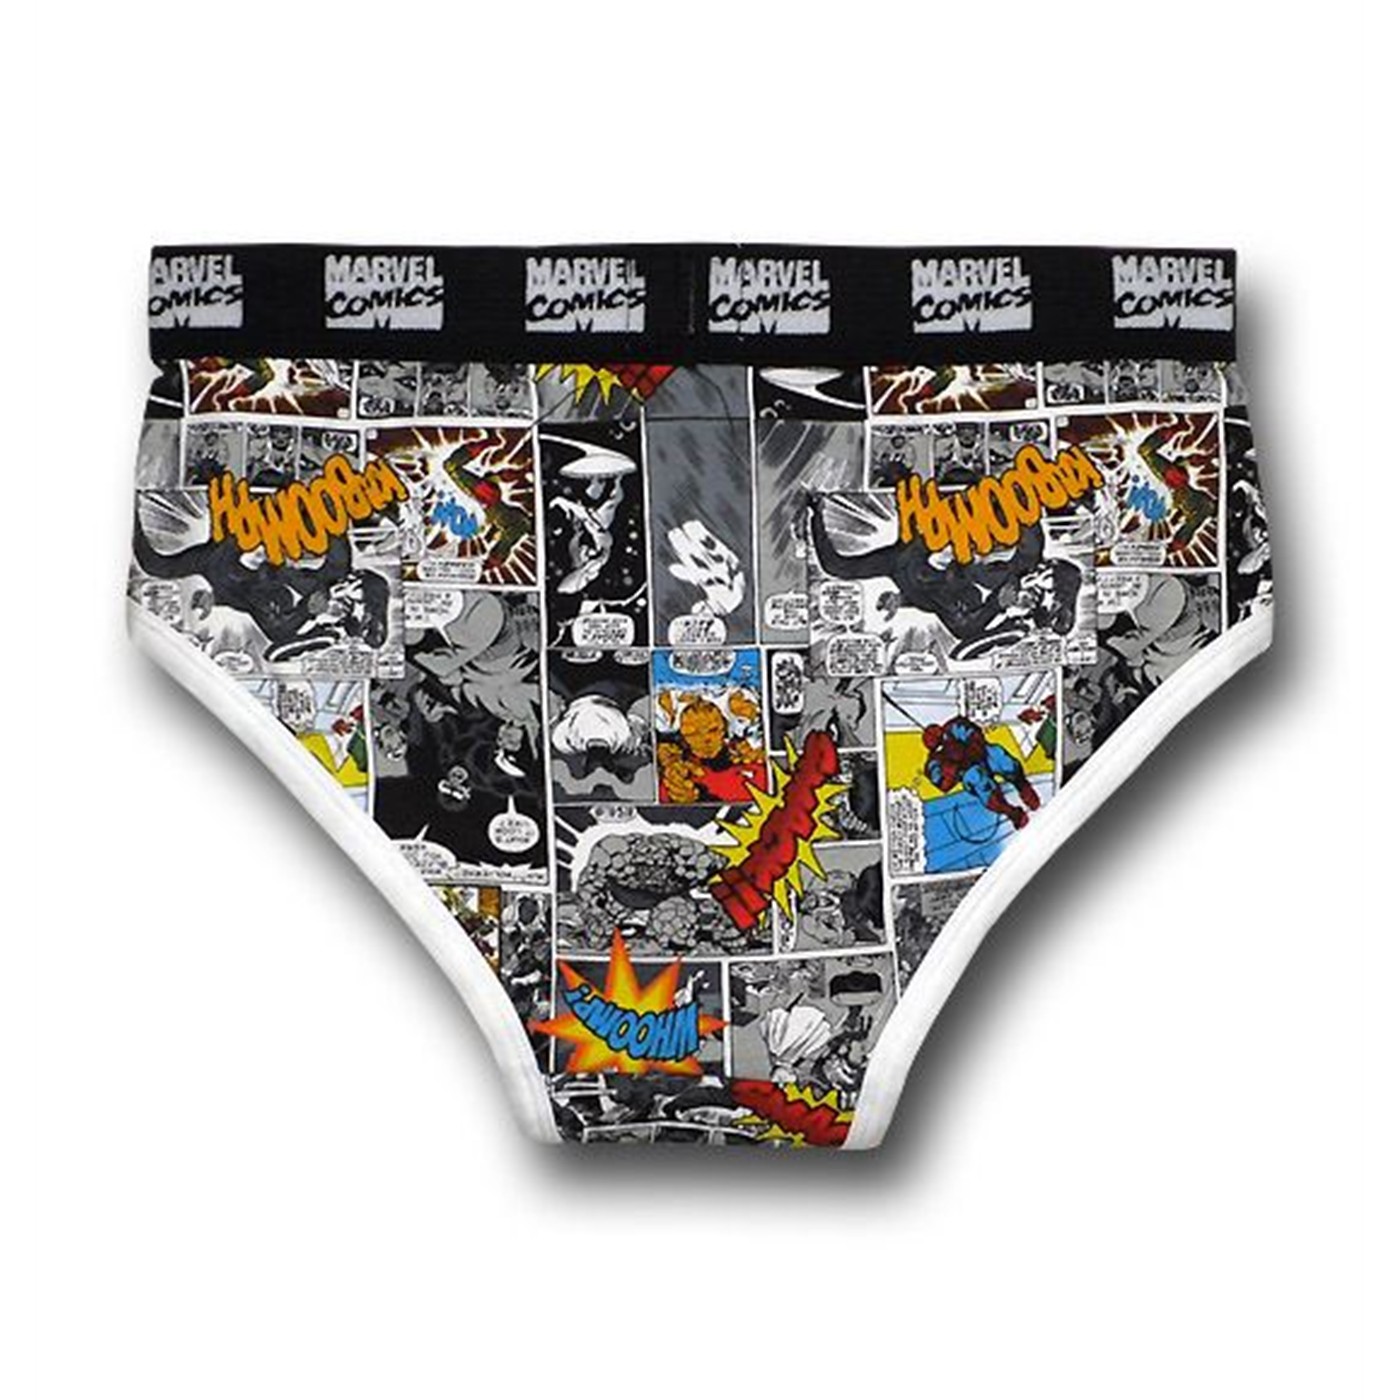 Marvel Classic Panels Collage Briefs